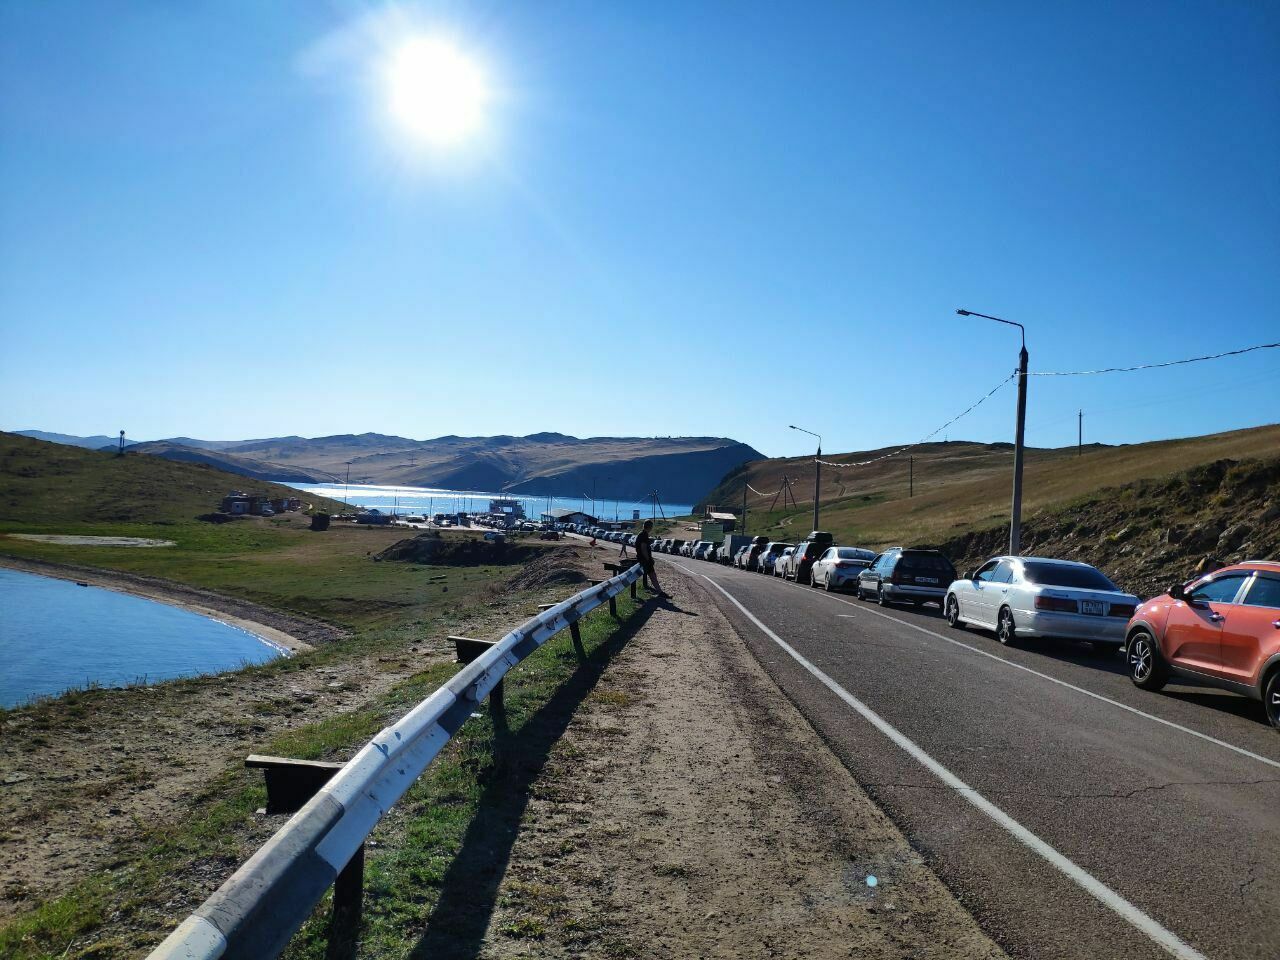 No rest! The queue for the ferry to the Baikal resort of Olkhon takes a day